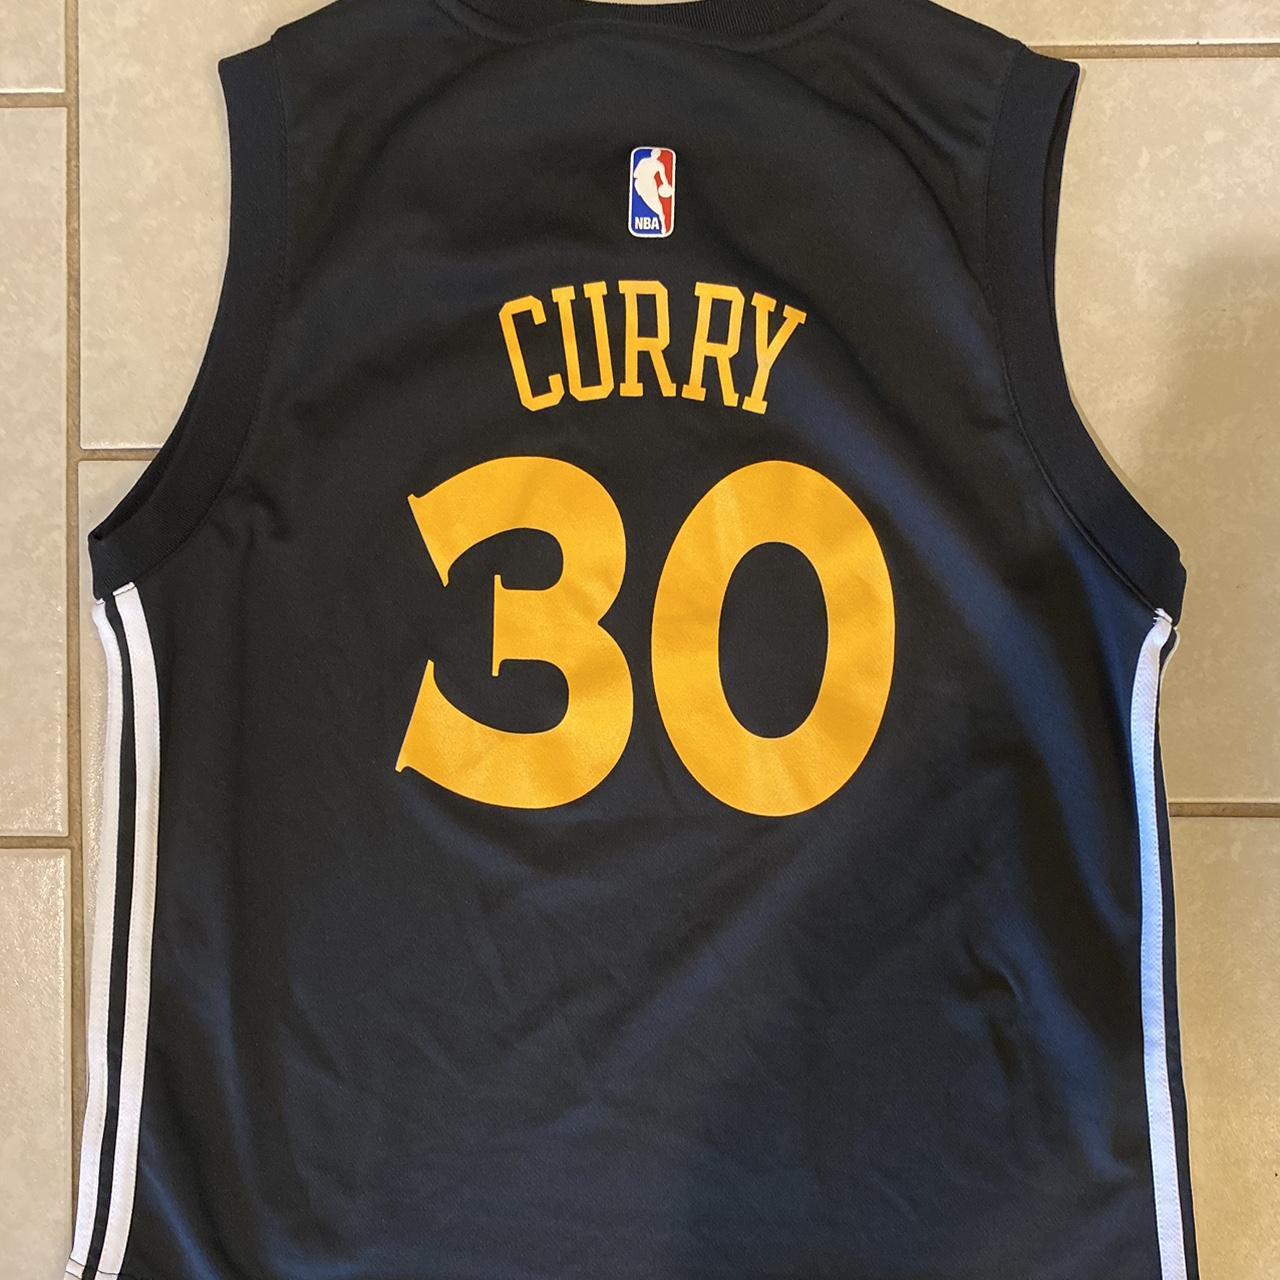 Adidas Steph Curry Jersey Size Large (Fits xs-small - Depop